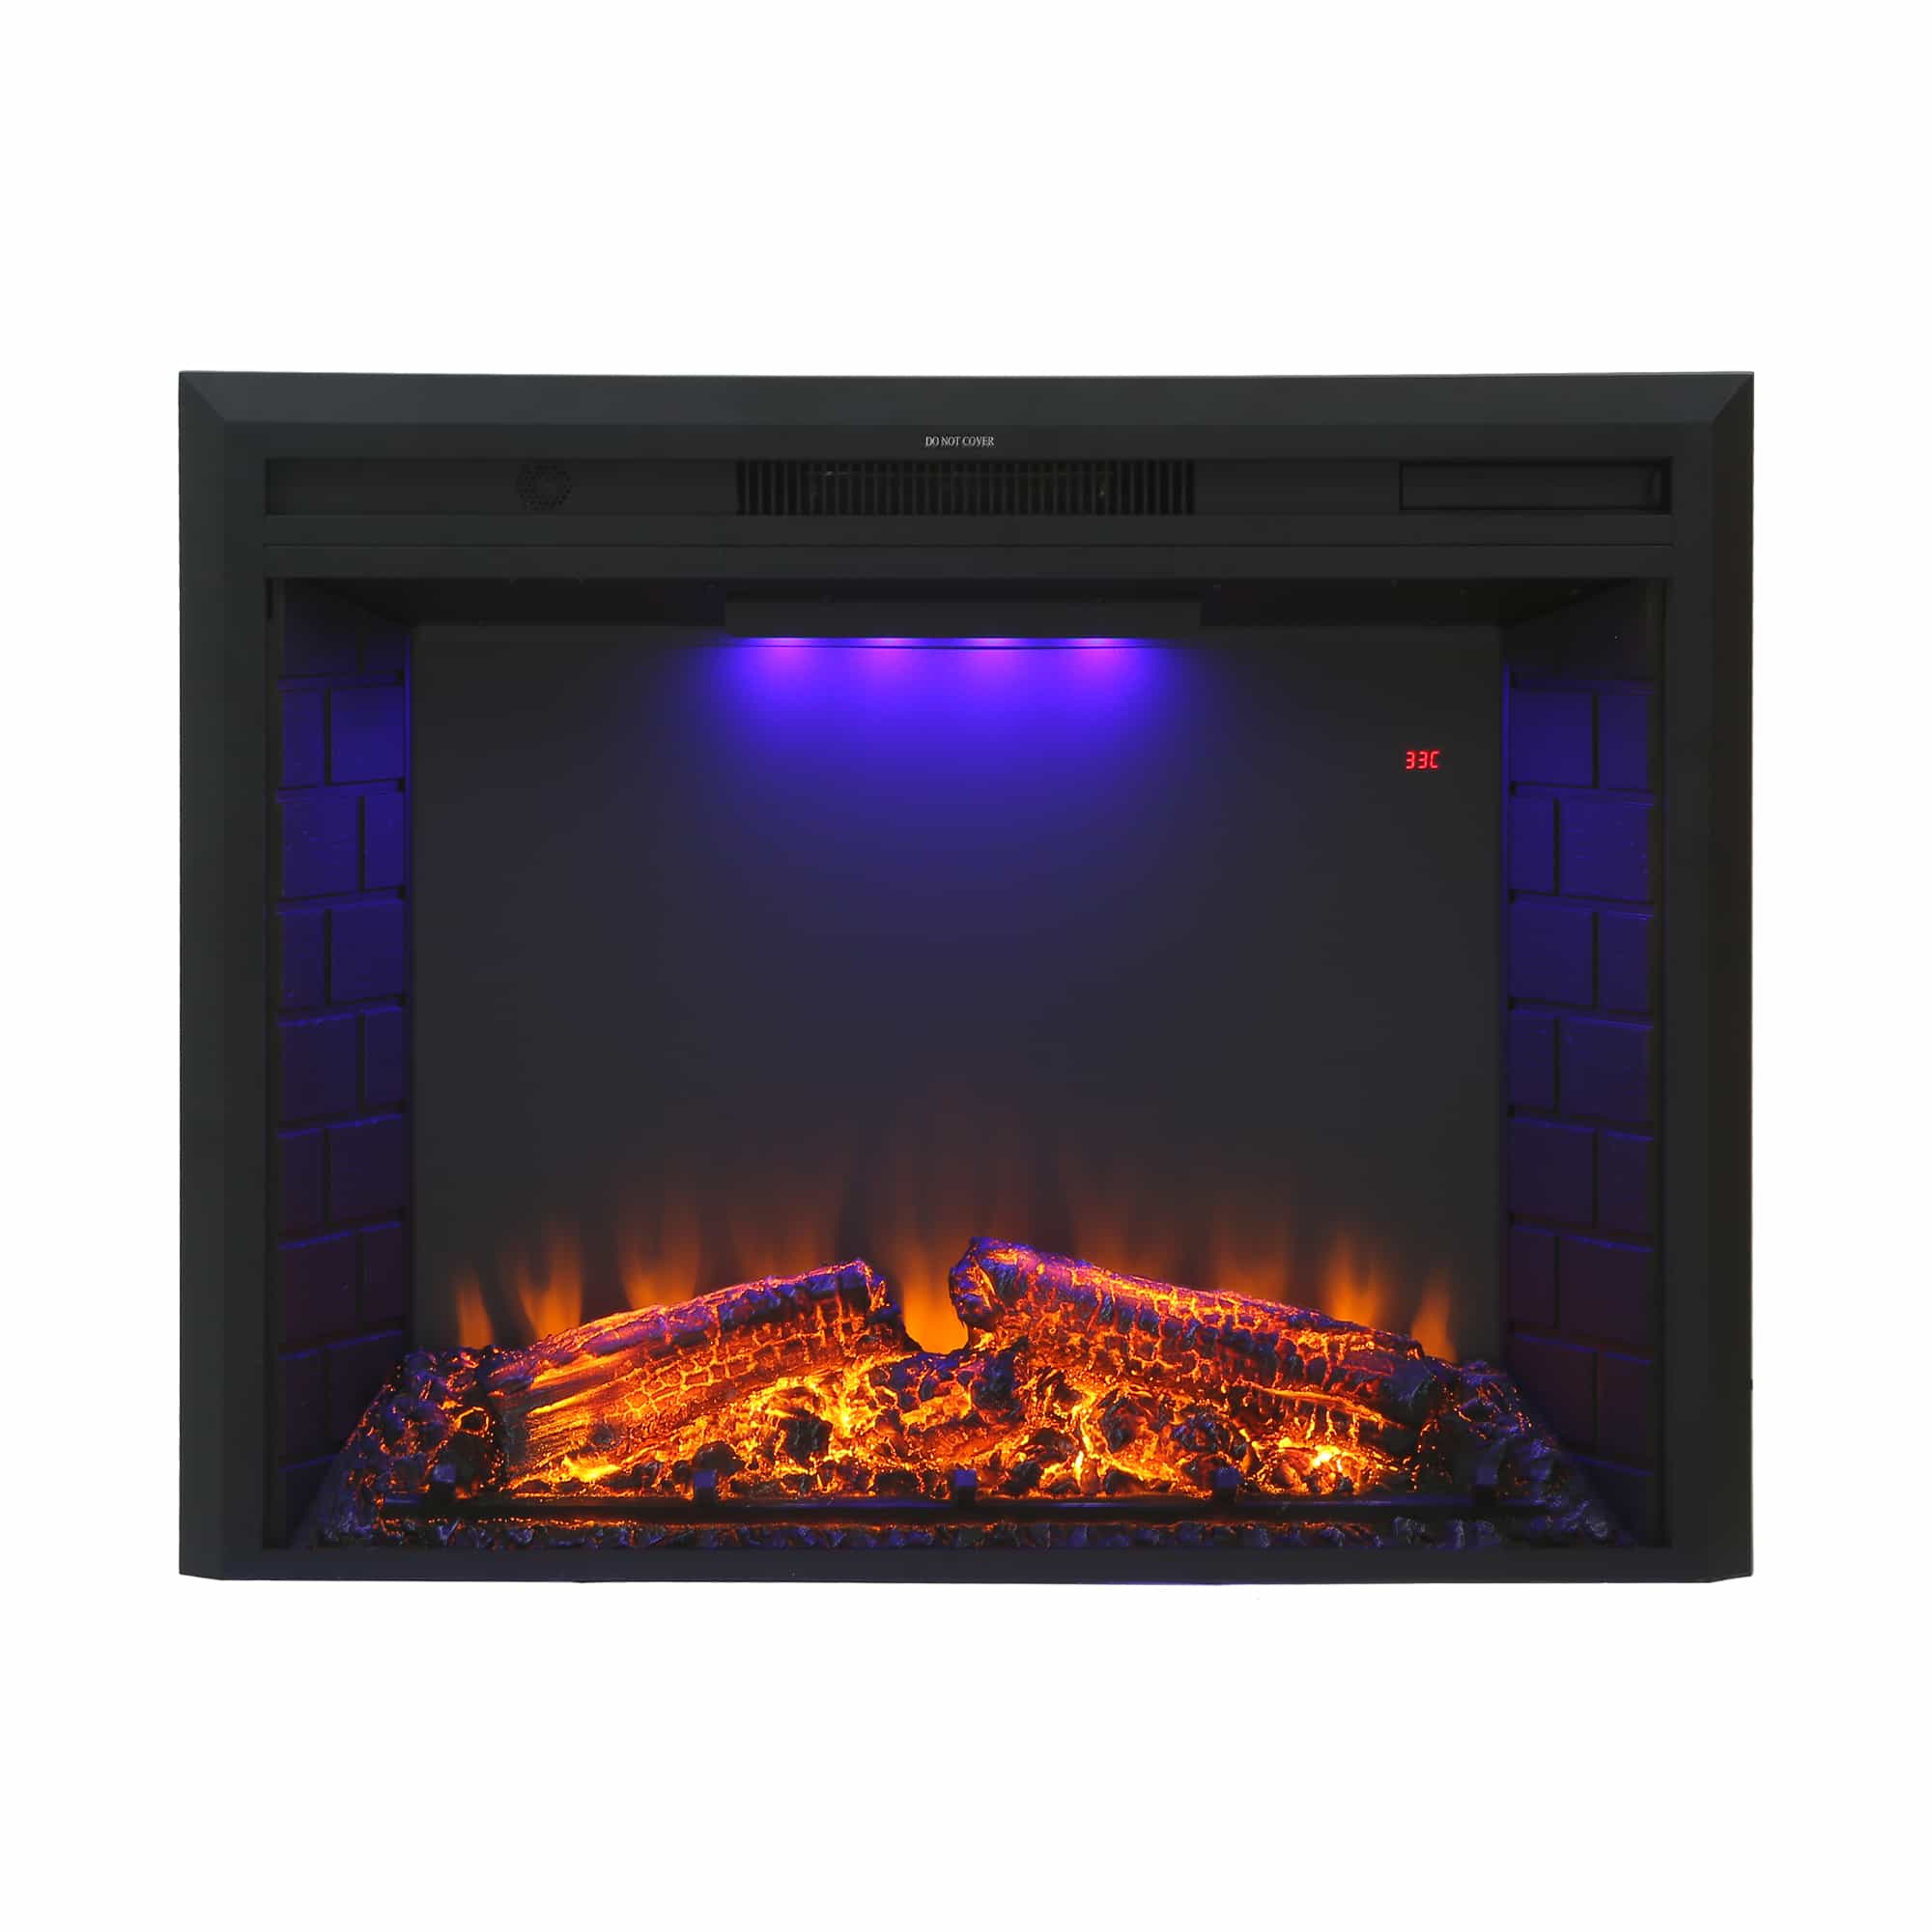 CASAINC 36 Inch LED Electric Fireplace Insert in Black